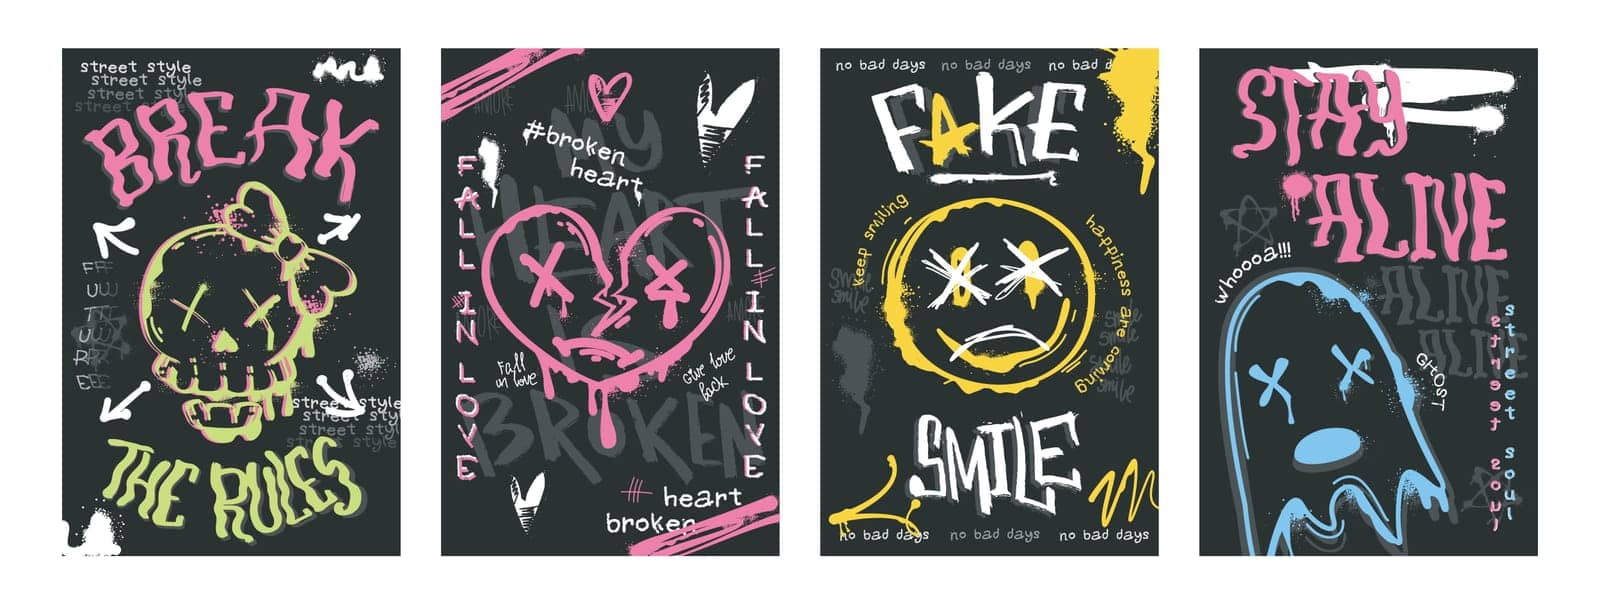 Set of graffiti poster with spray paint skull, heart sign, ghost and smiling face emoji. Street art covers of splashes, ink drip splatter, faces in hand drawing style on black background. Urban design